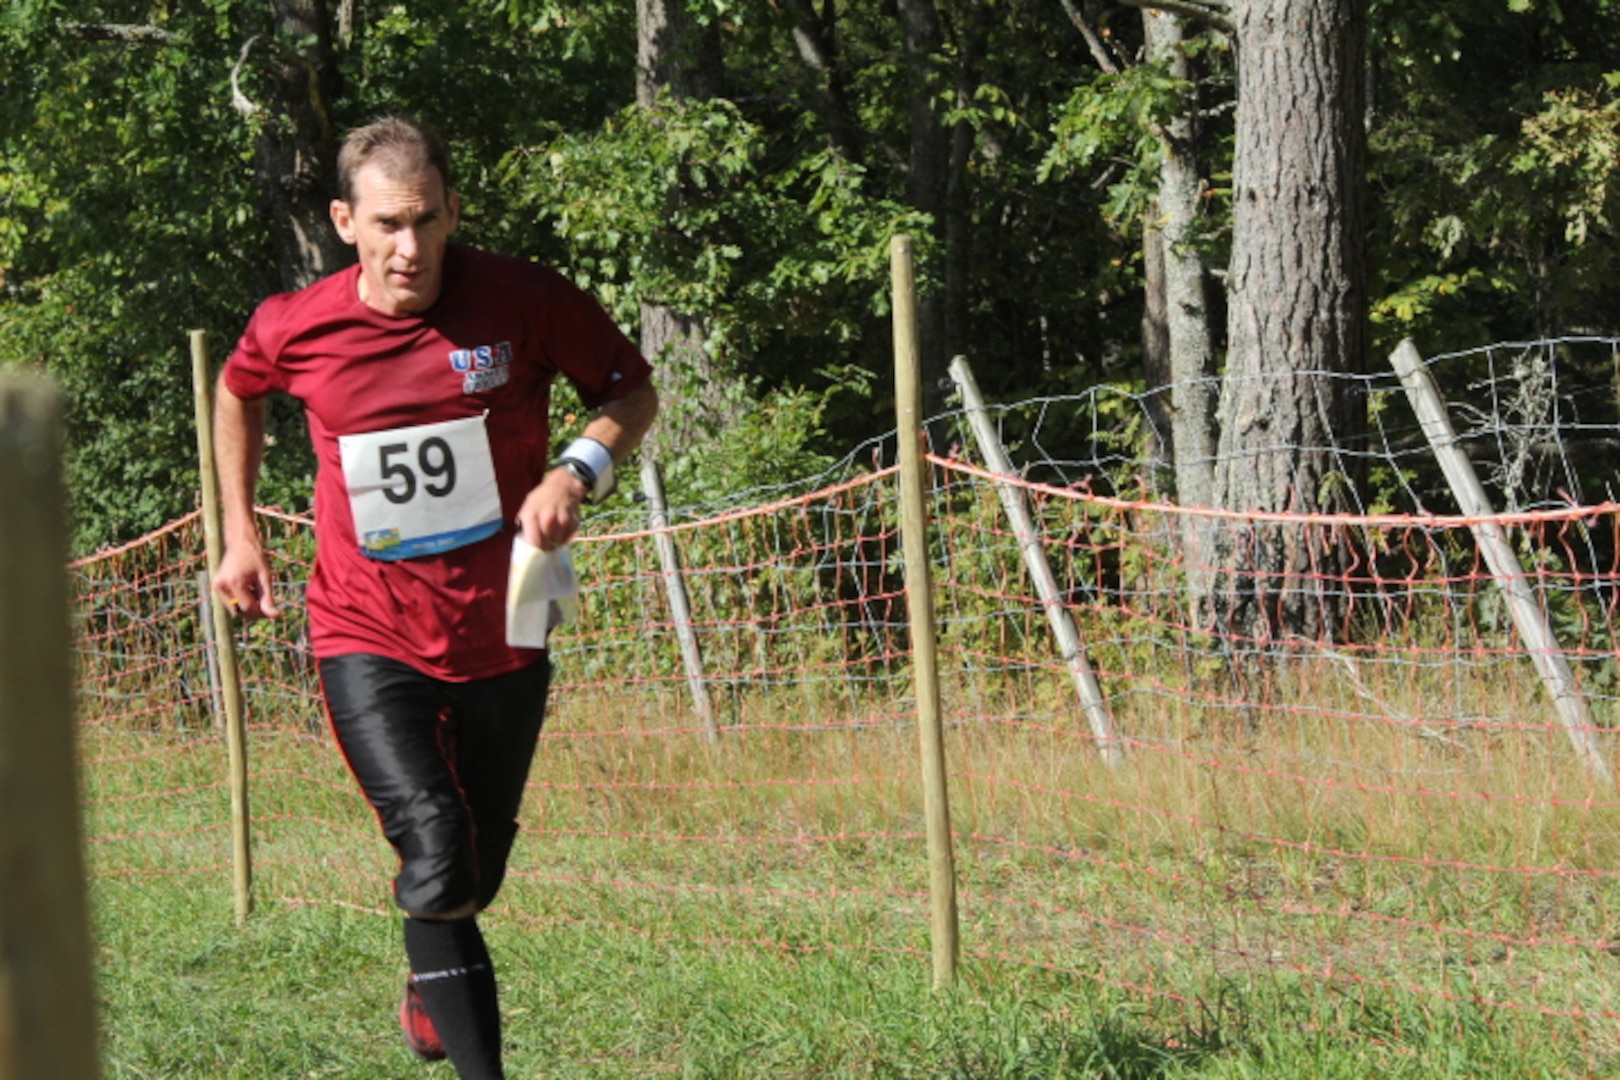 LTC Liam Collins (Army) navigating the course at the 2013 CISM World Orienteering Military Championship hosted by the Swedish Armed Forces in Eksjo, Sweden from 26 August to 1 September.